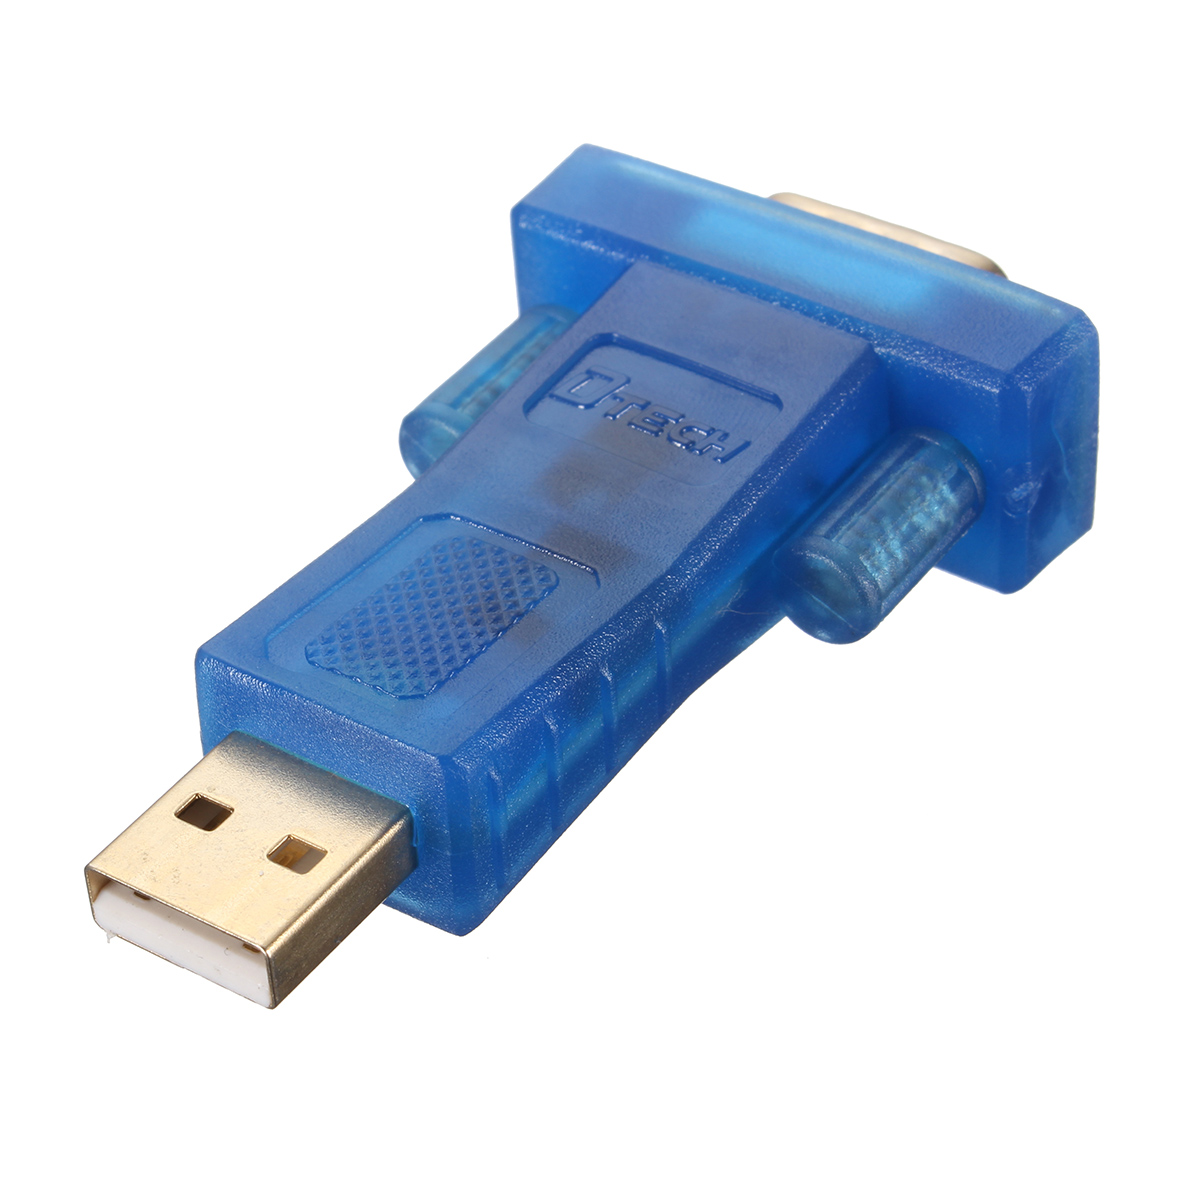 Dtech Usb To Serial Driver